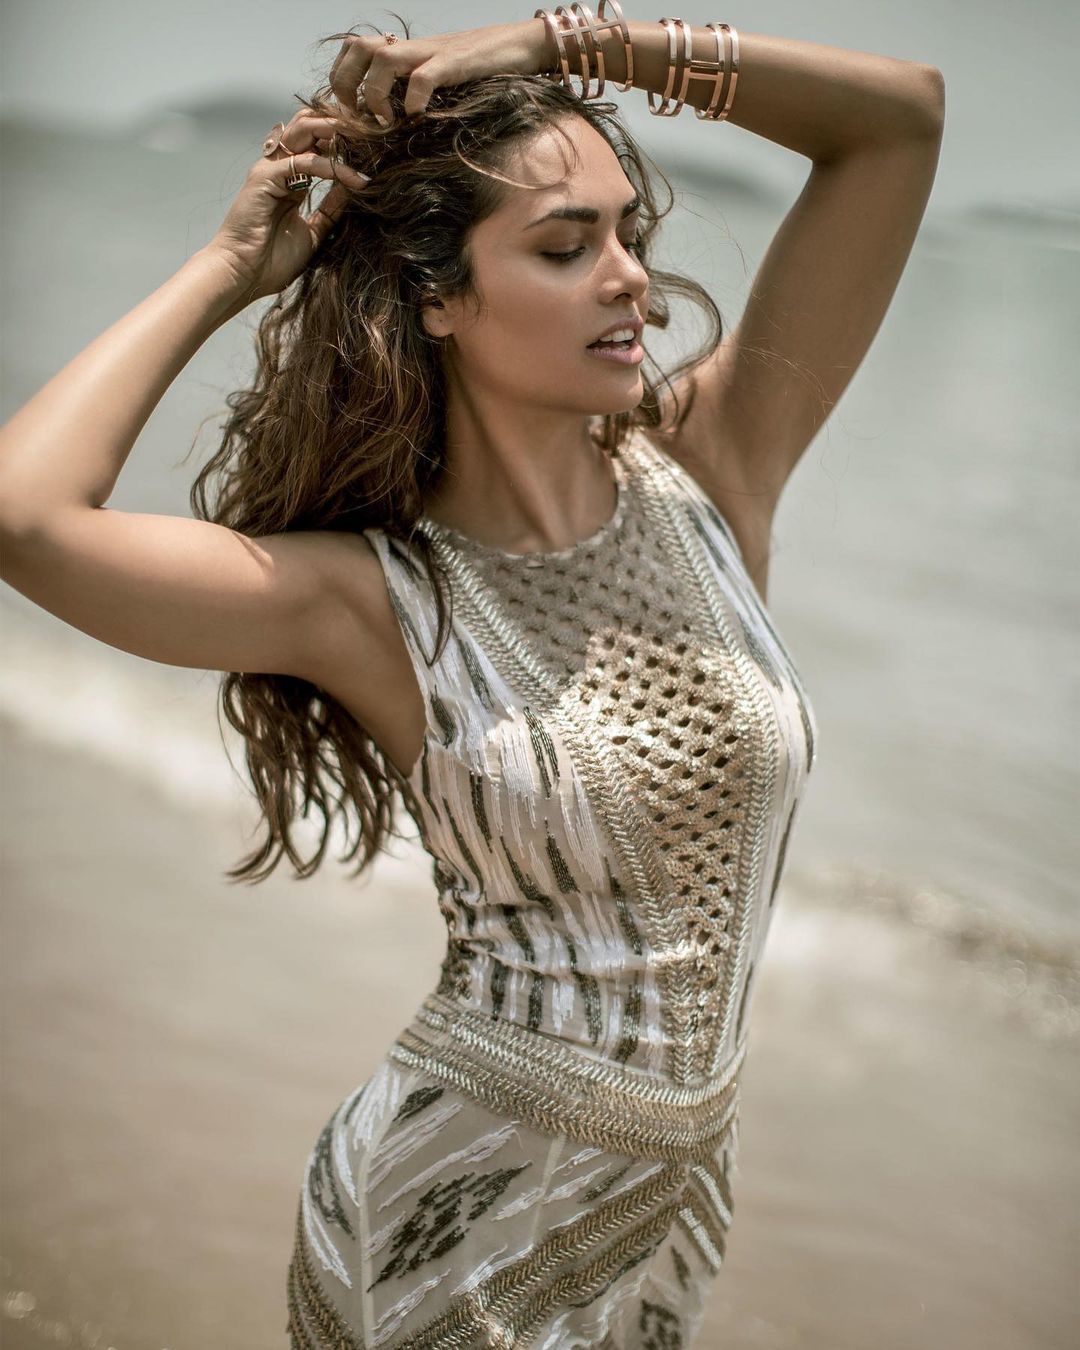 Esha Gupta Turns Up The Heat With Her Smouldering Looks See The Diva S Sexiest Photos News18